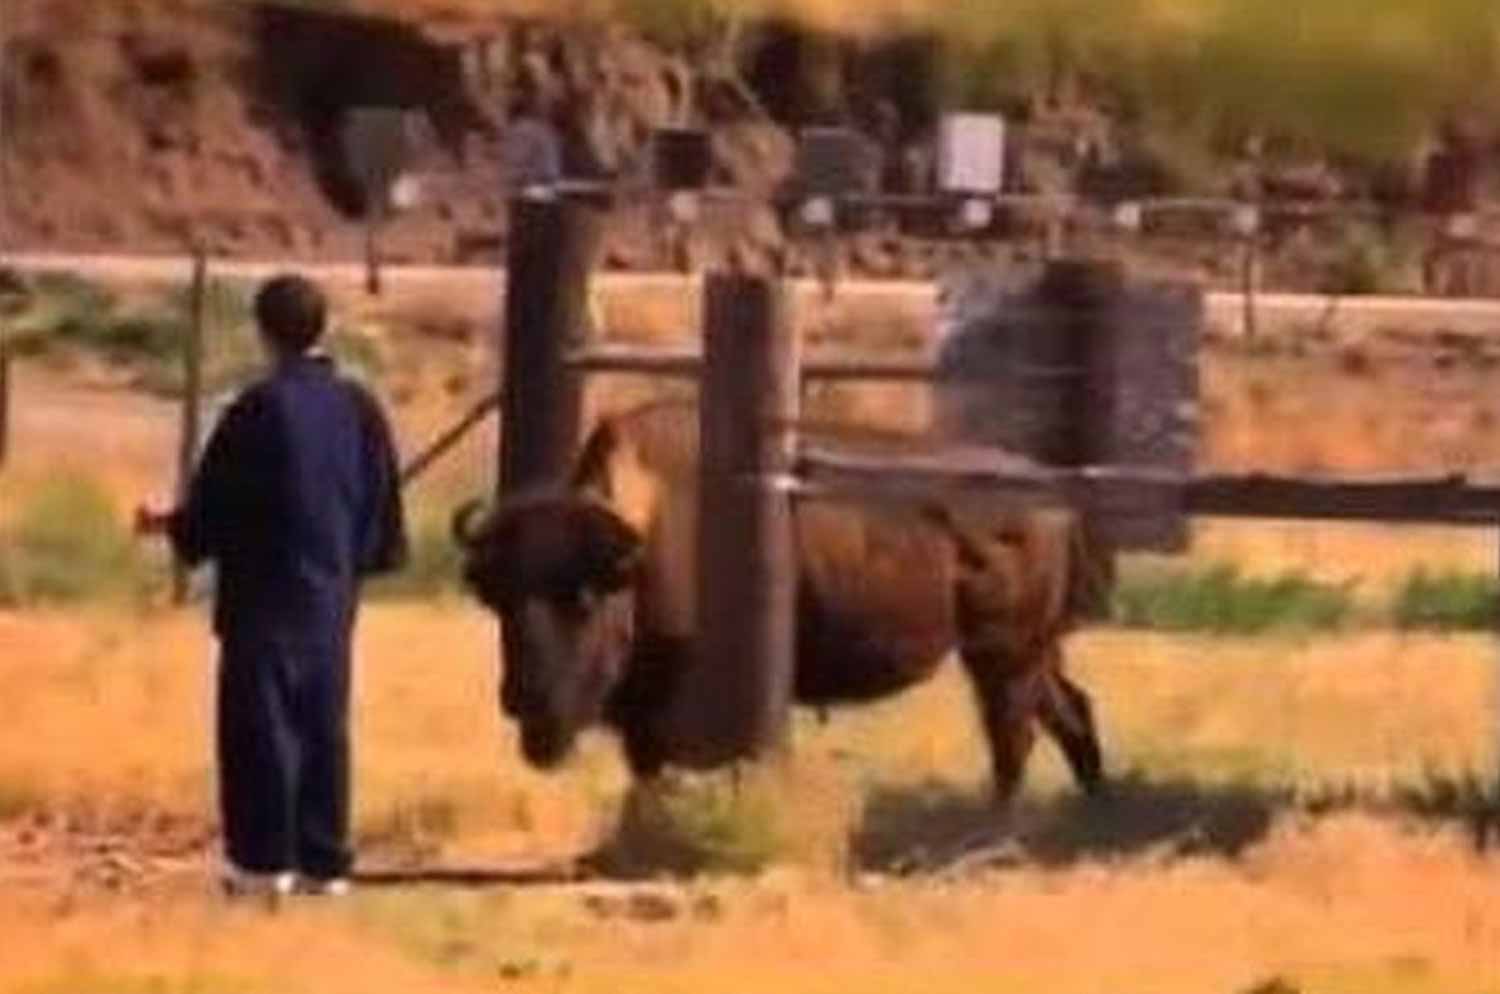 mster kanzawa stands next to a giant buffalo with no fear